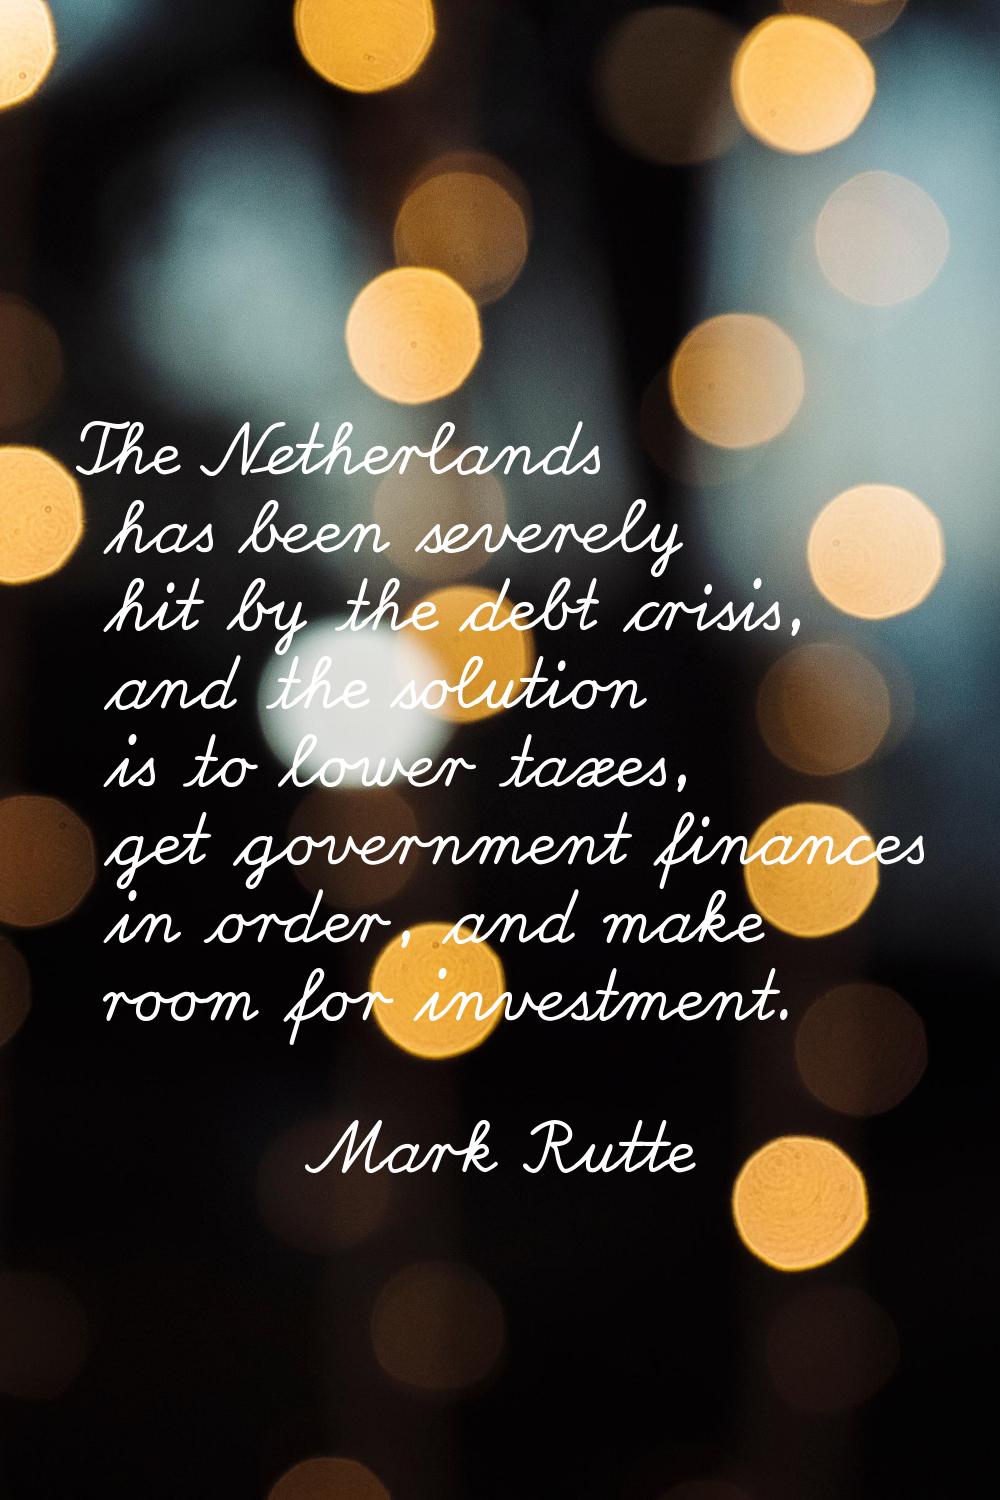 The Netherlands has been severely hit by the debt crisis, and the solution is to lower taxes, get g